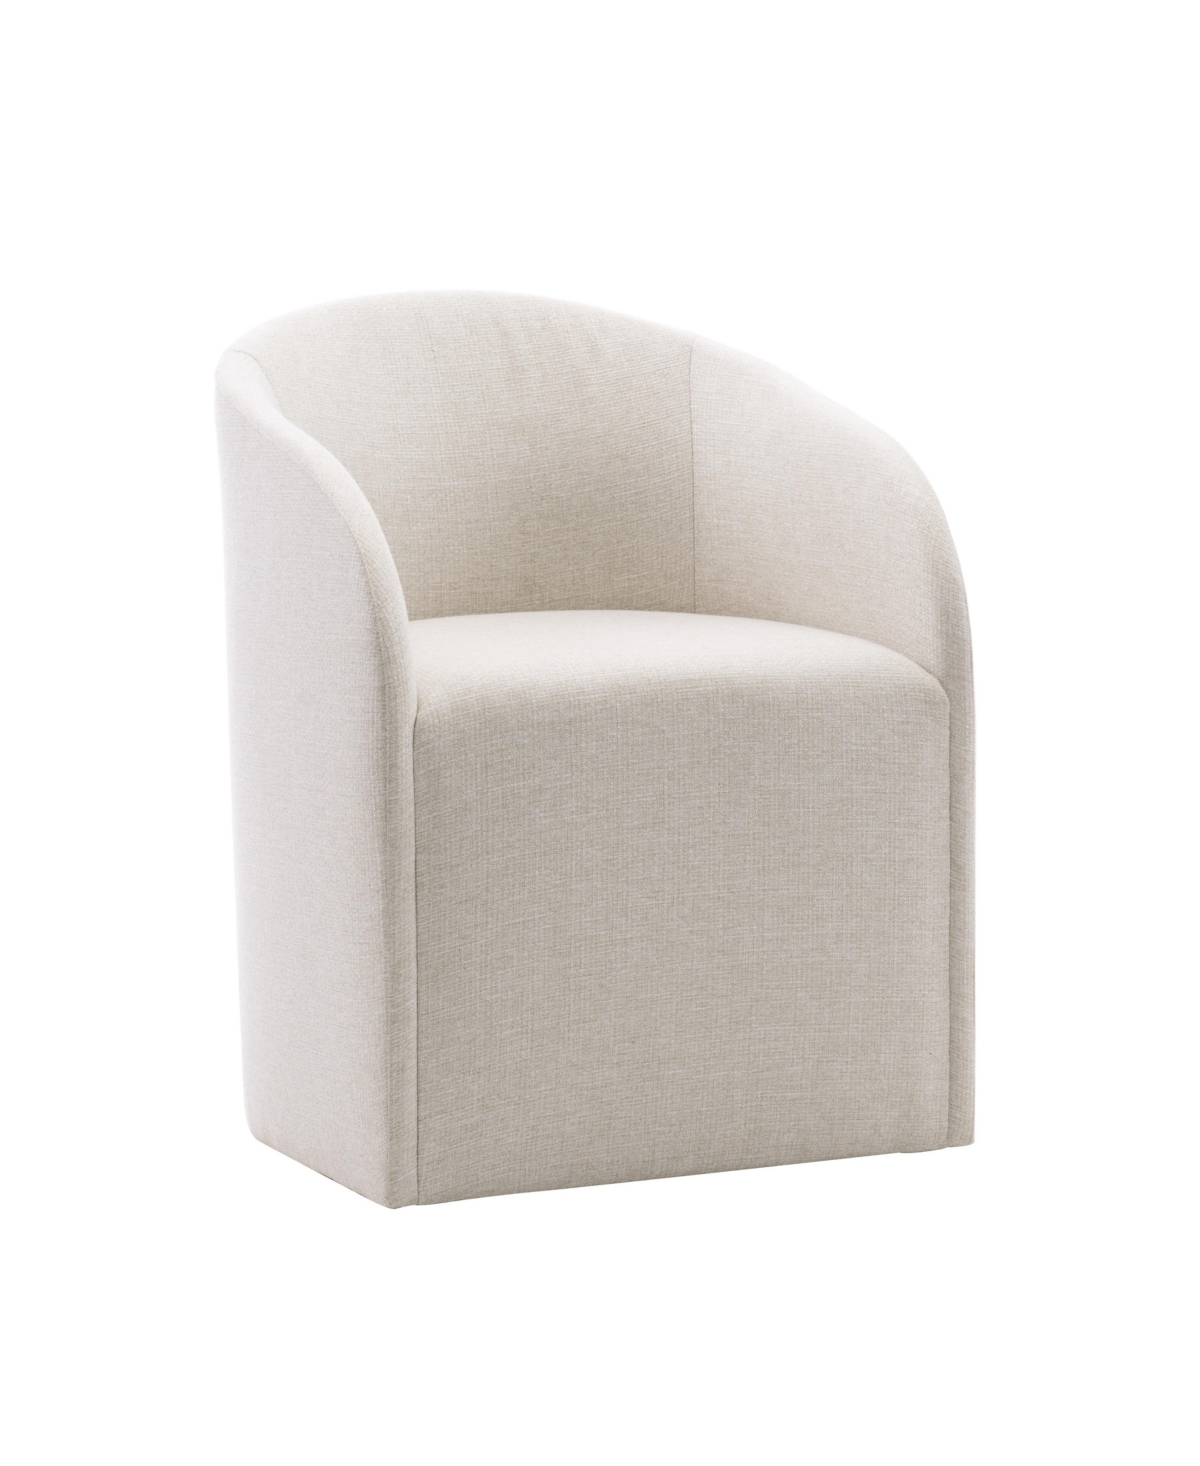 11462264 Logan Square castered arm chair, By Bernhardt sku 11462264